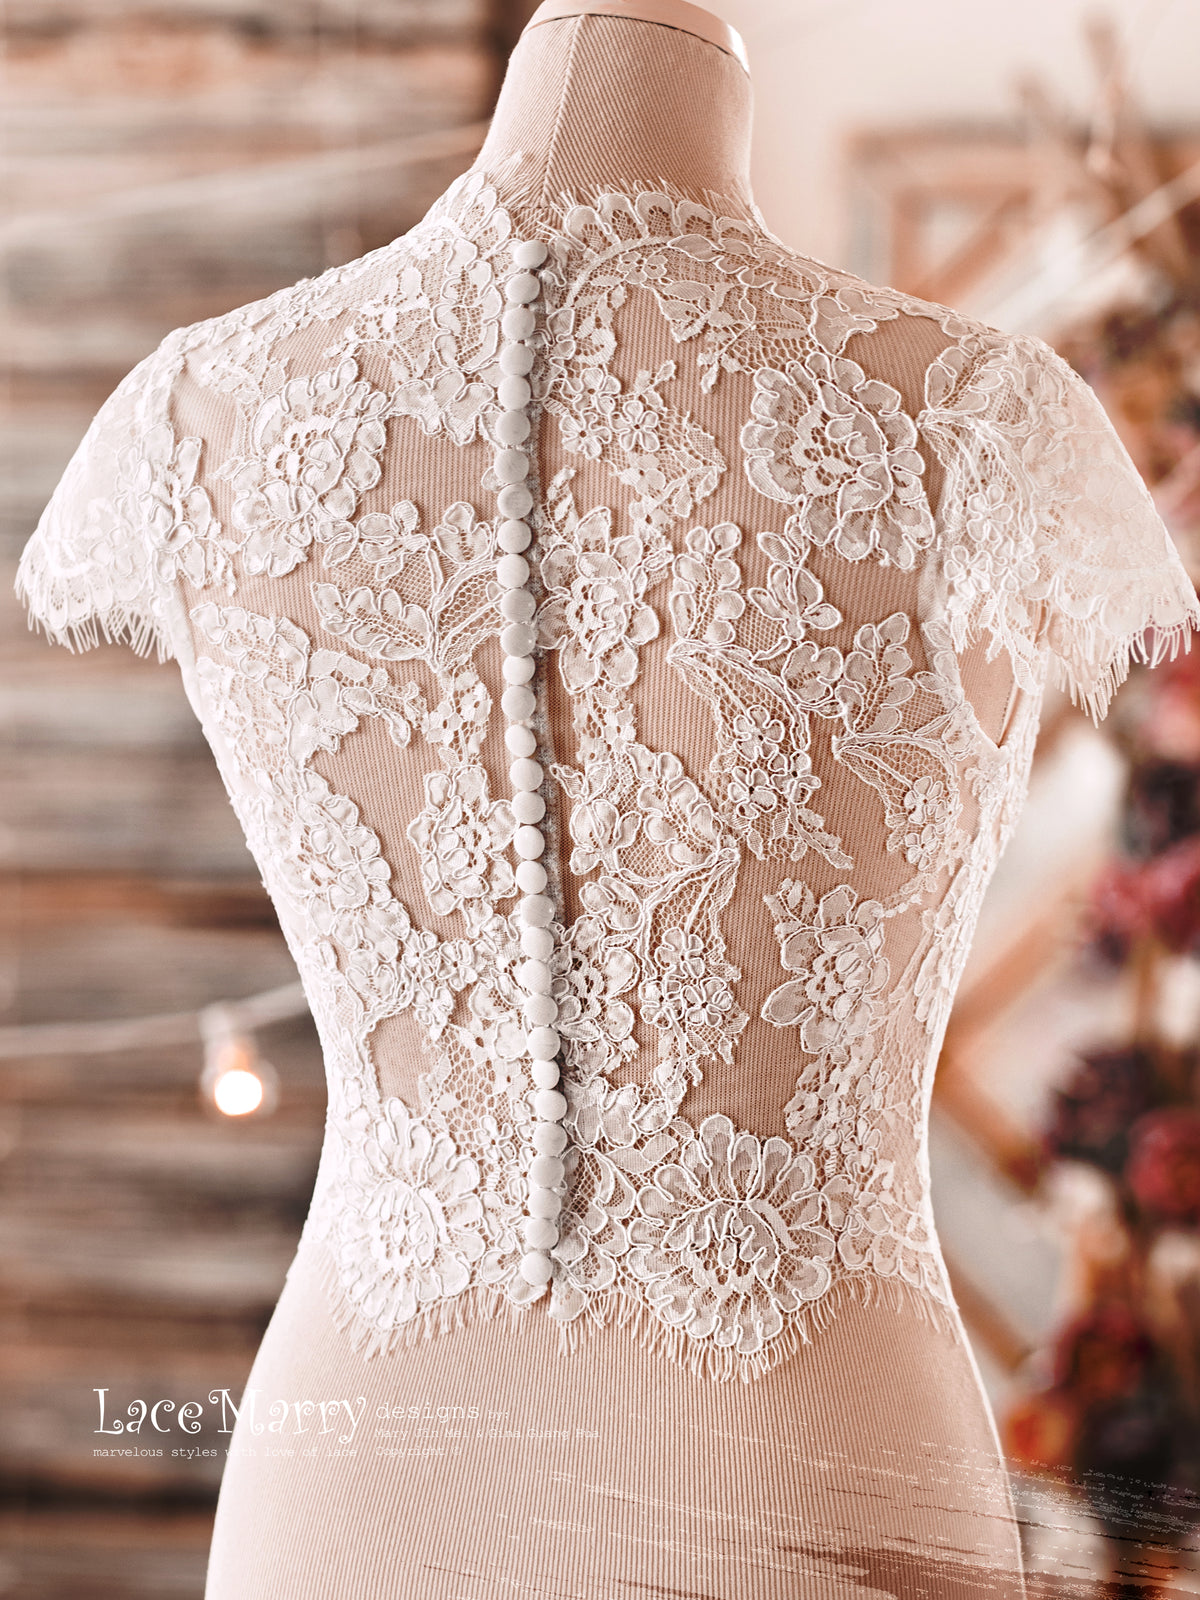 Charming Bridal Lace Crop Top with High Collar - LaceMarry